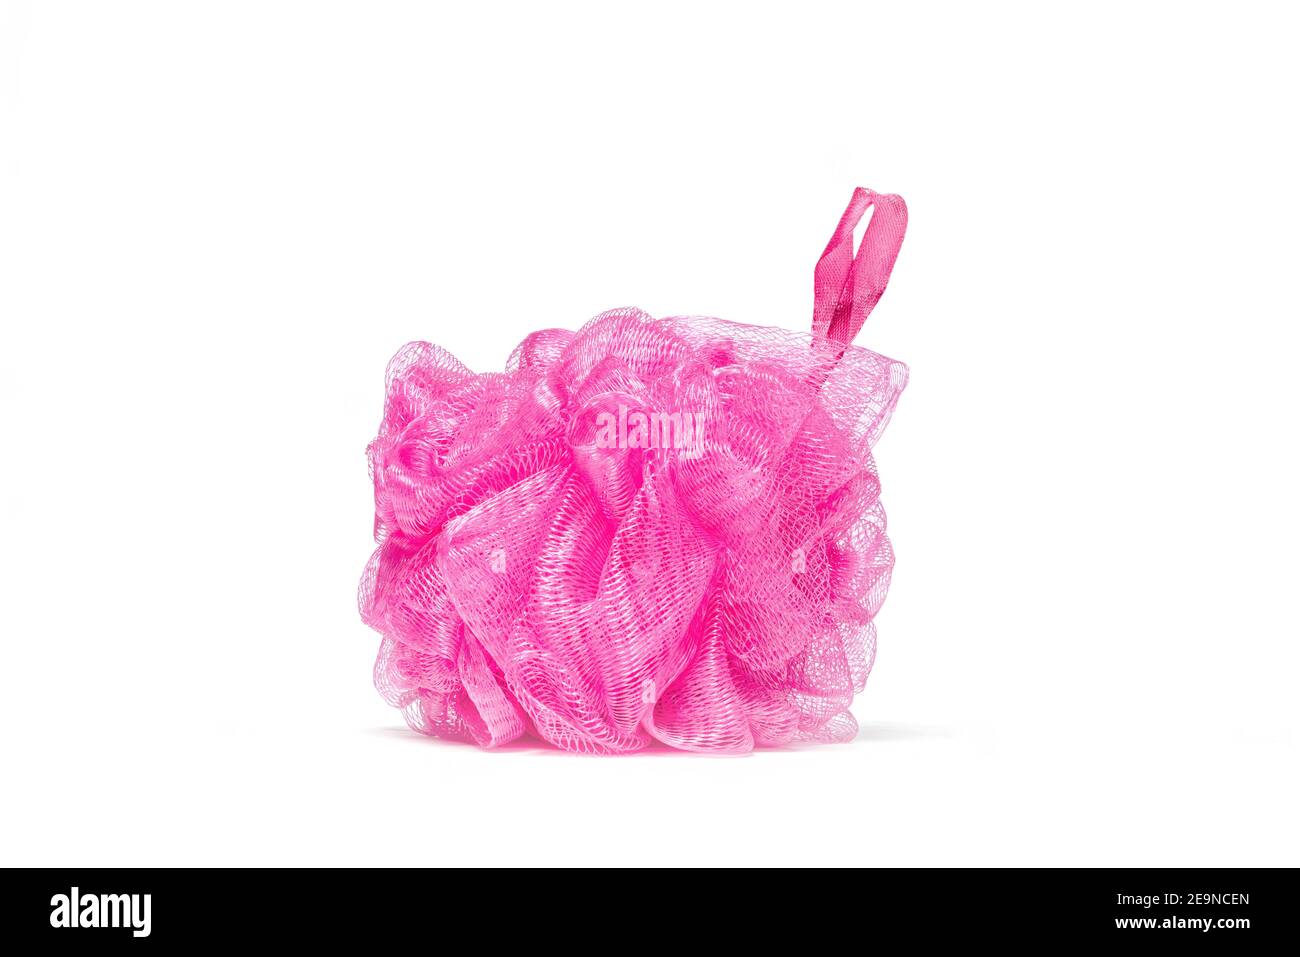 Horizontal shot of a pink bath scrunchie or loofah with shadow on a white background. Stock Photo